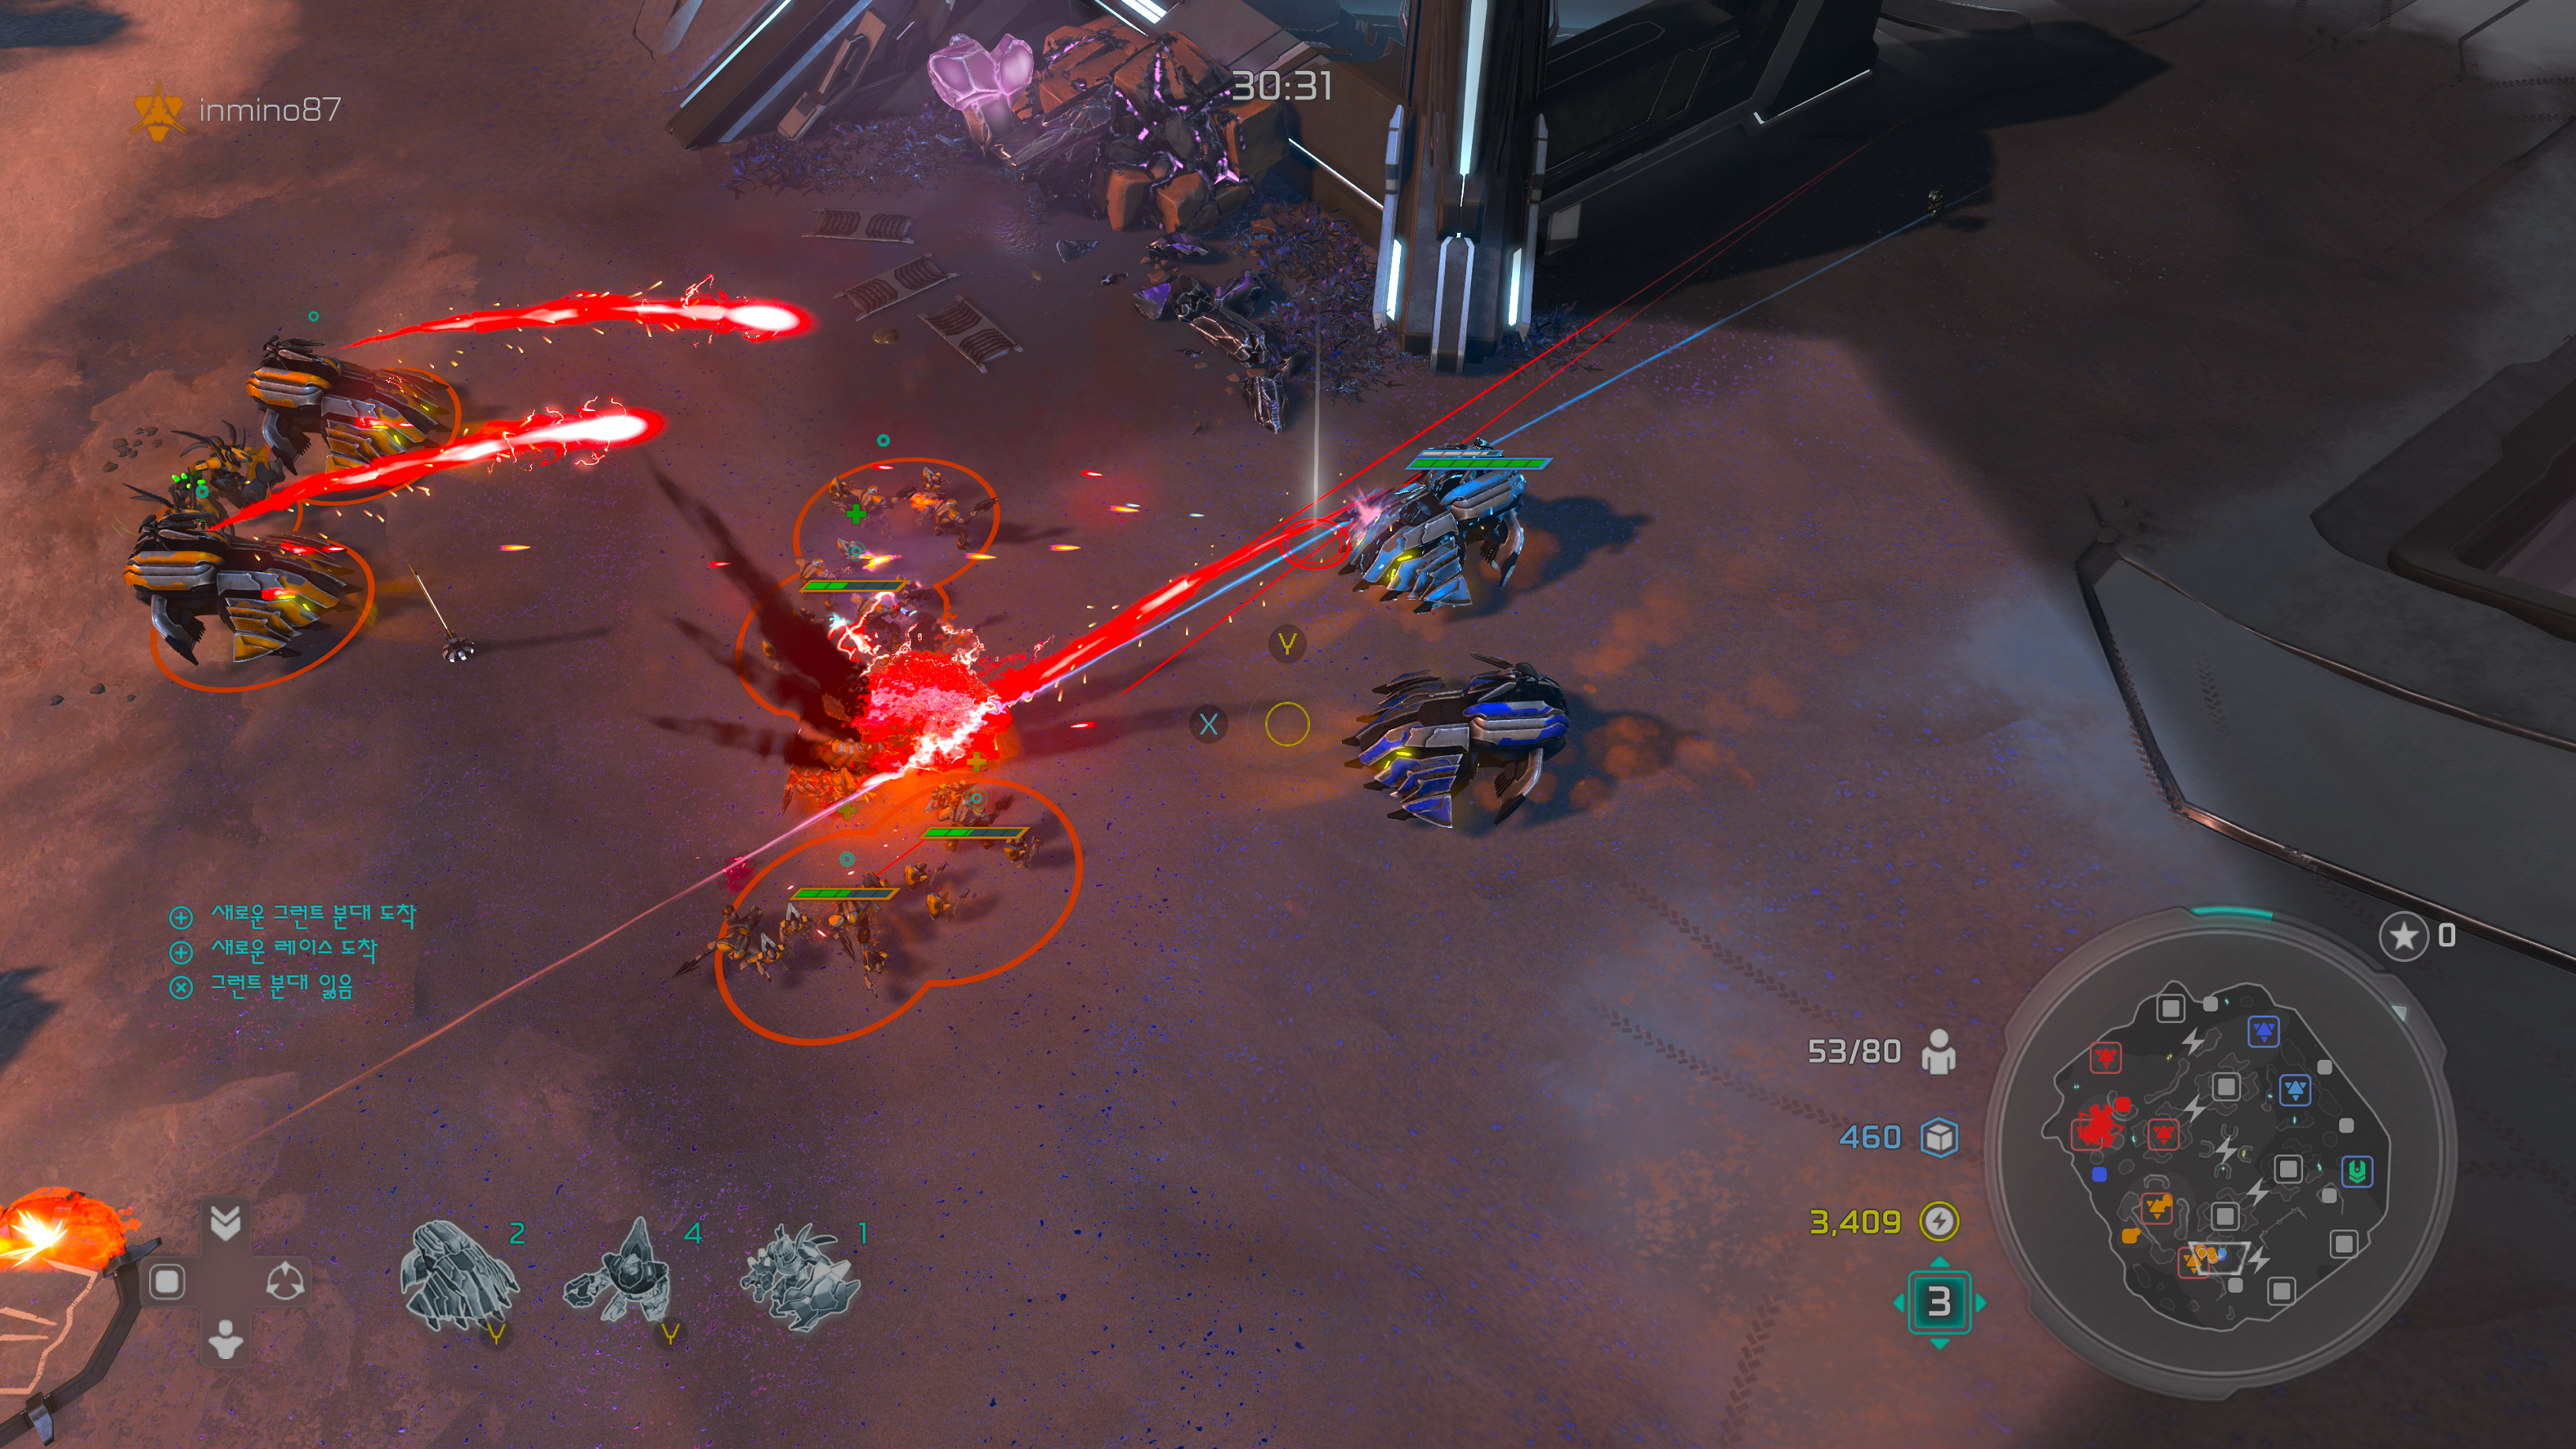 Halo Wars 2 2020-07-25 22-02-29.png